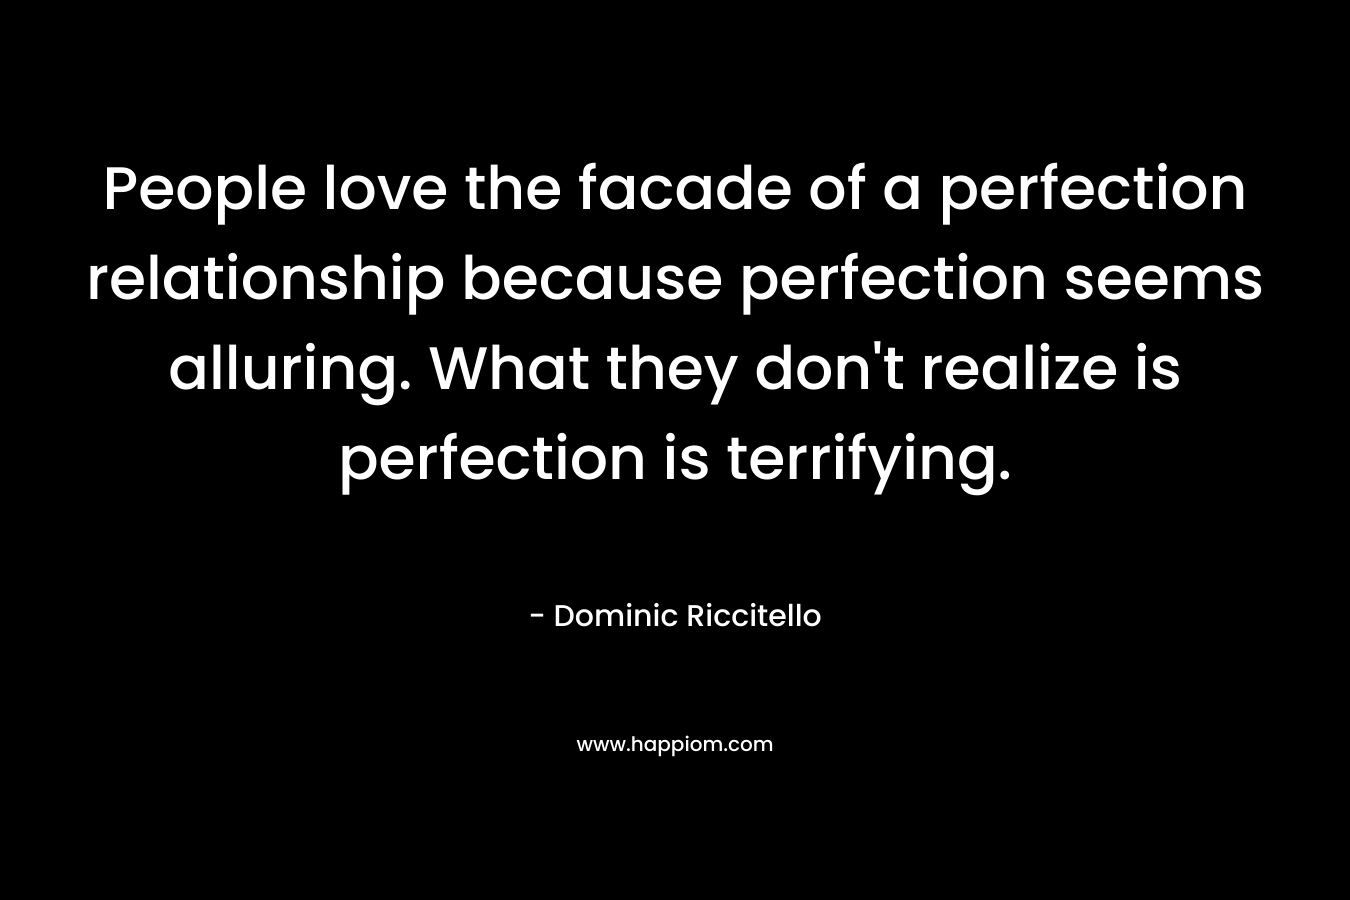 People love the facade of a perfection relationship because perfection seems alluring. What they don't realize is perfection is terrifying.